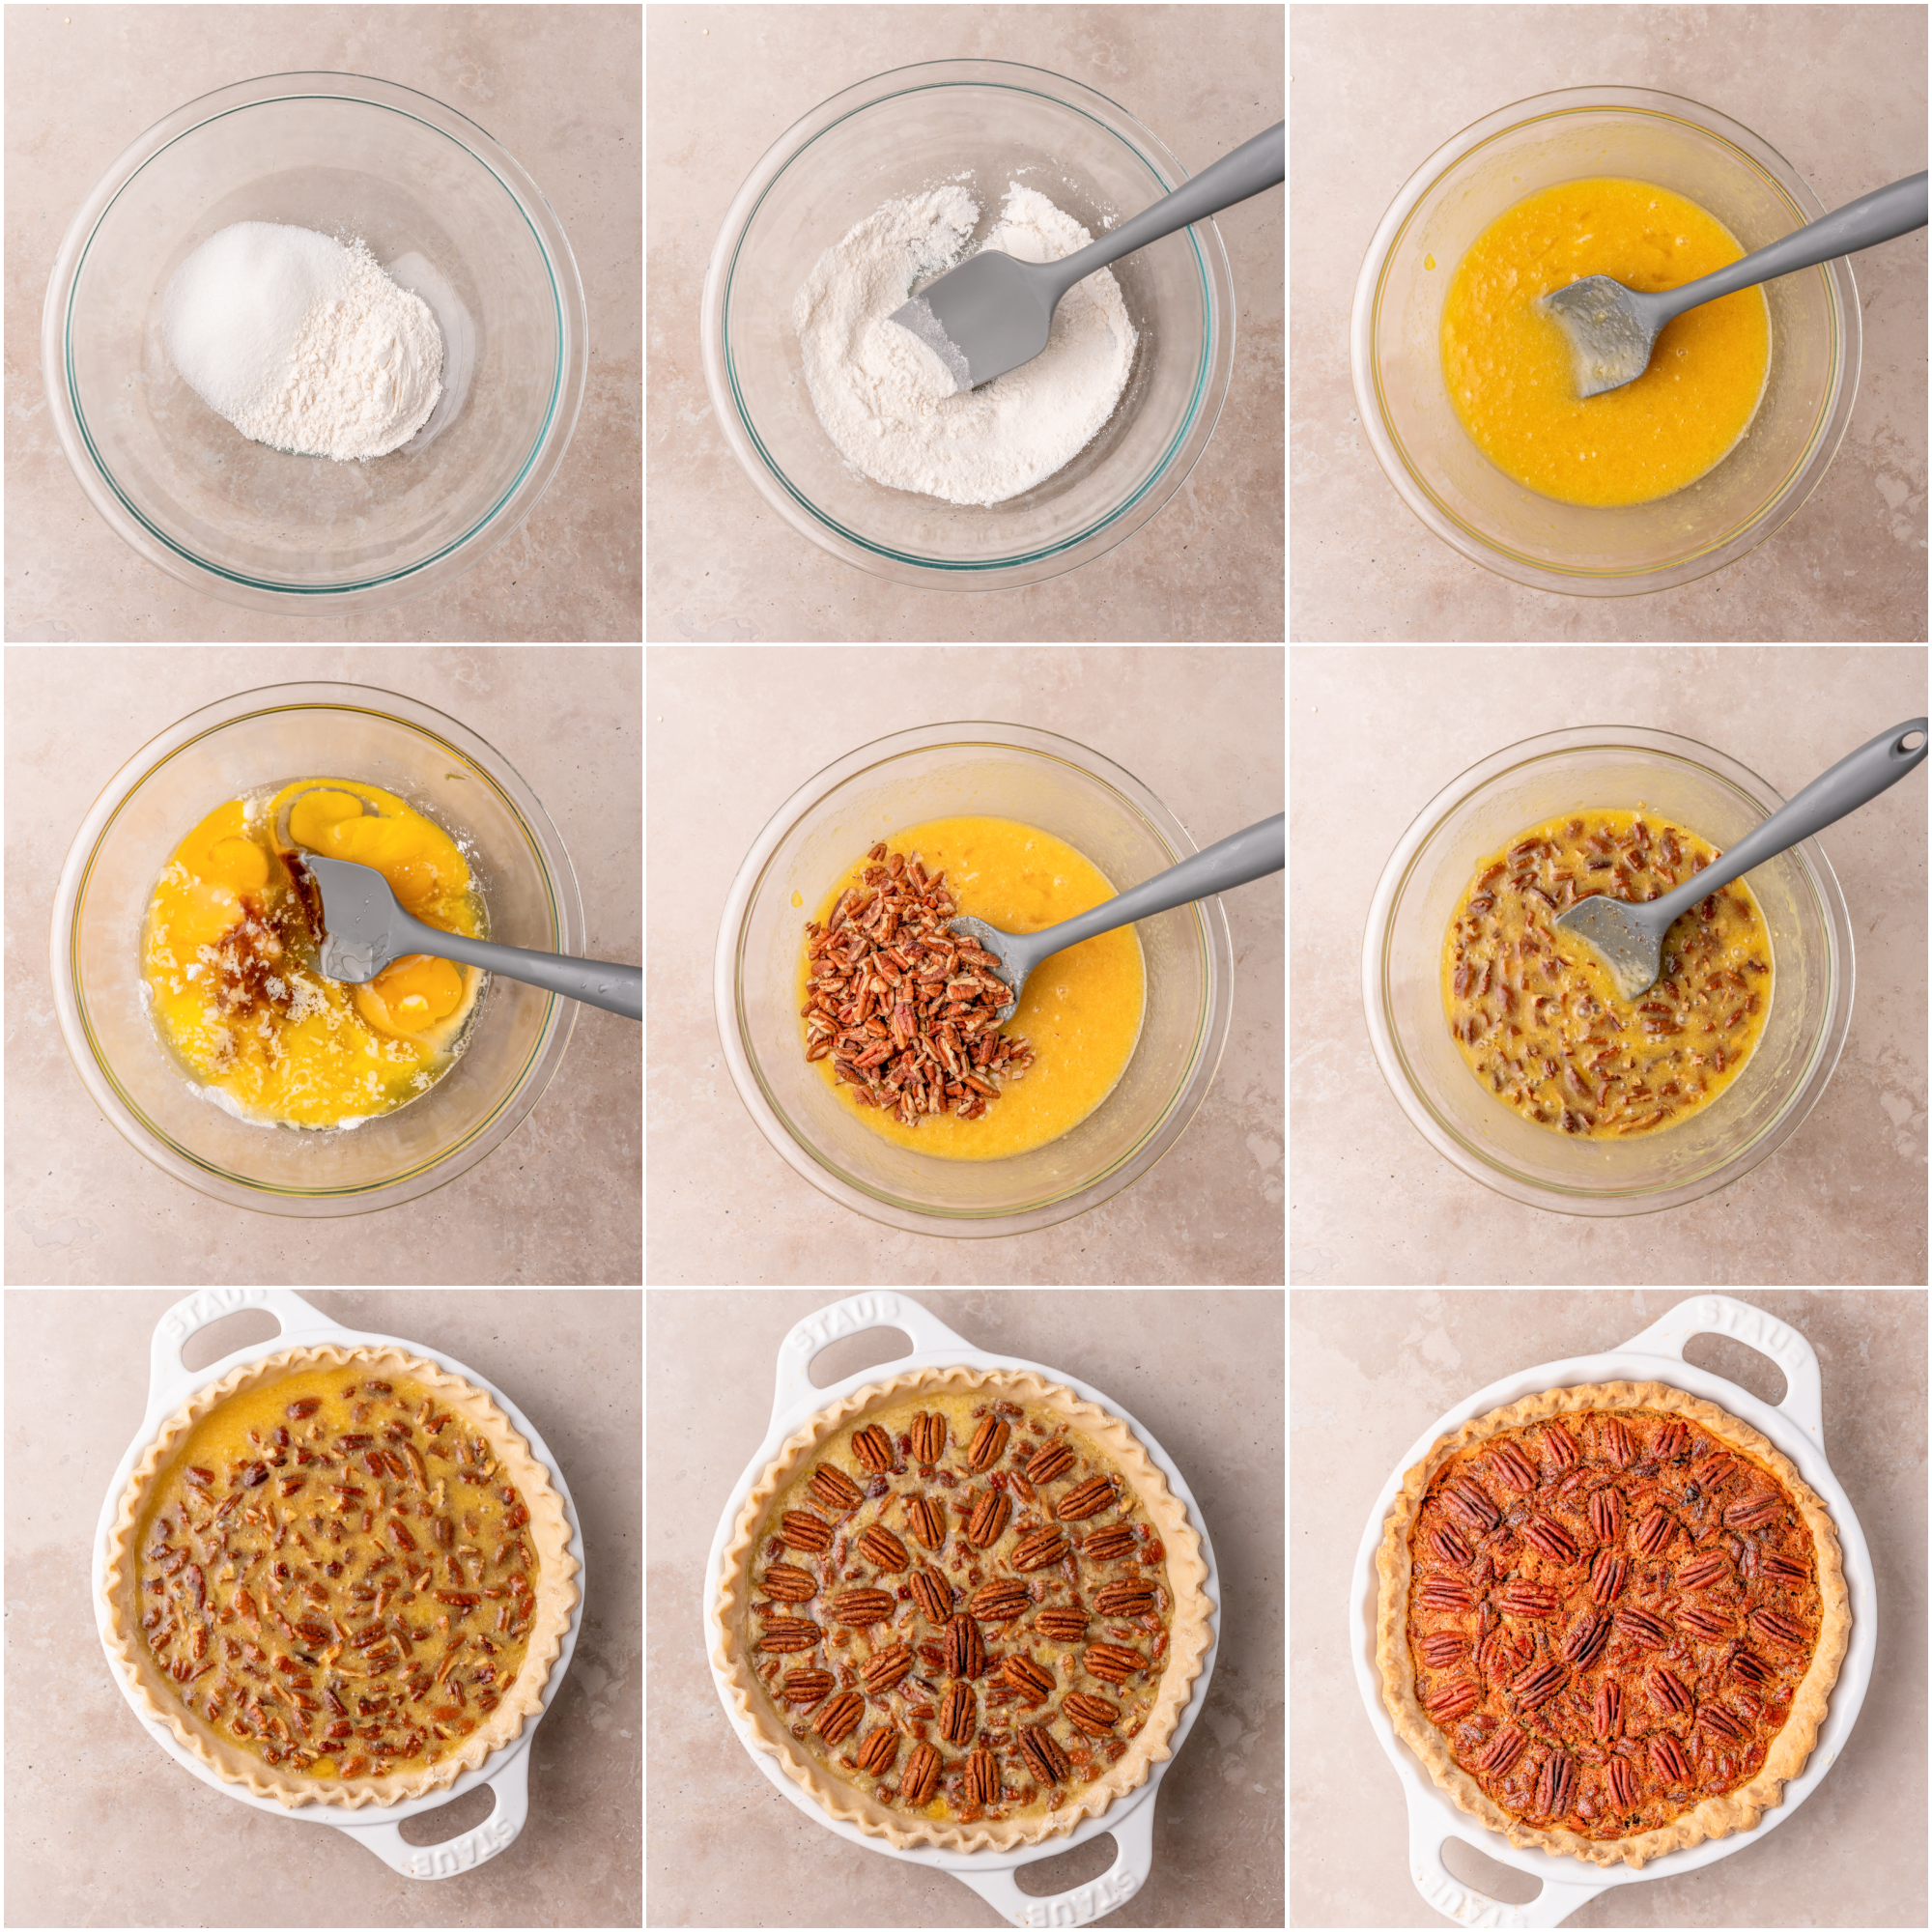 Collage image showing step by step instructions for making the pie.